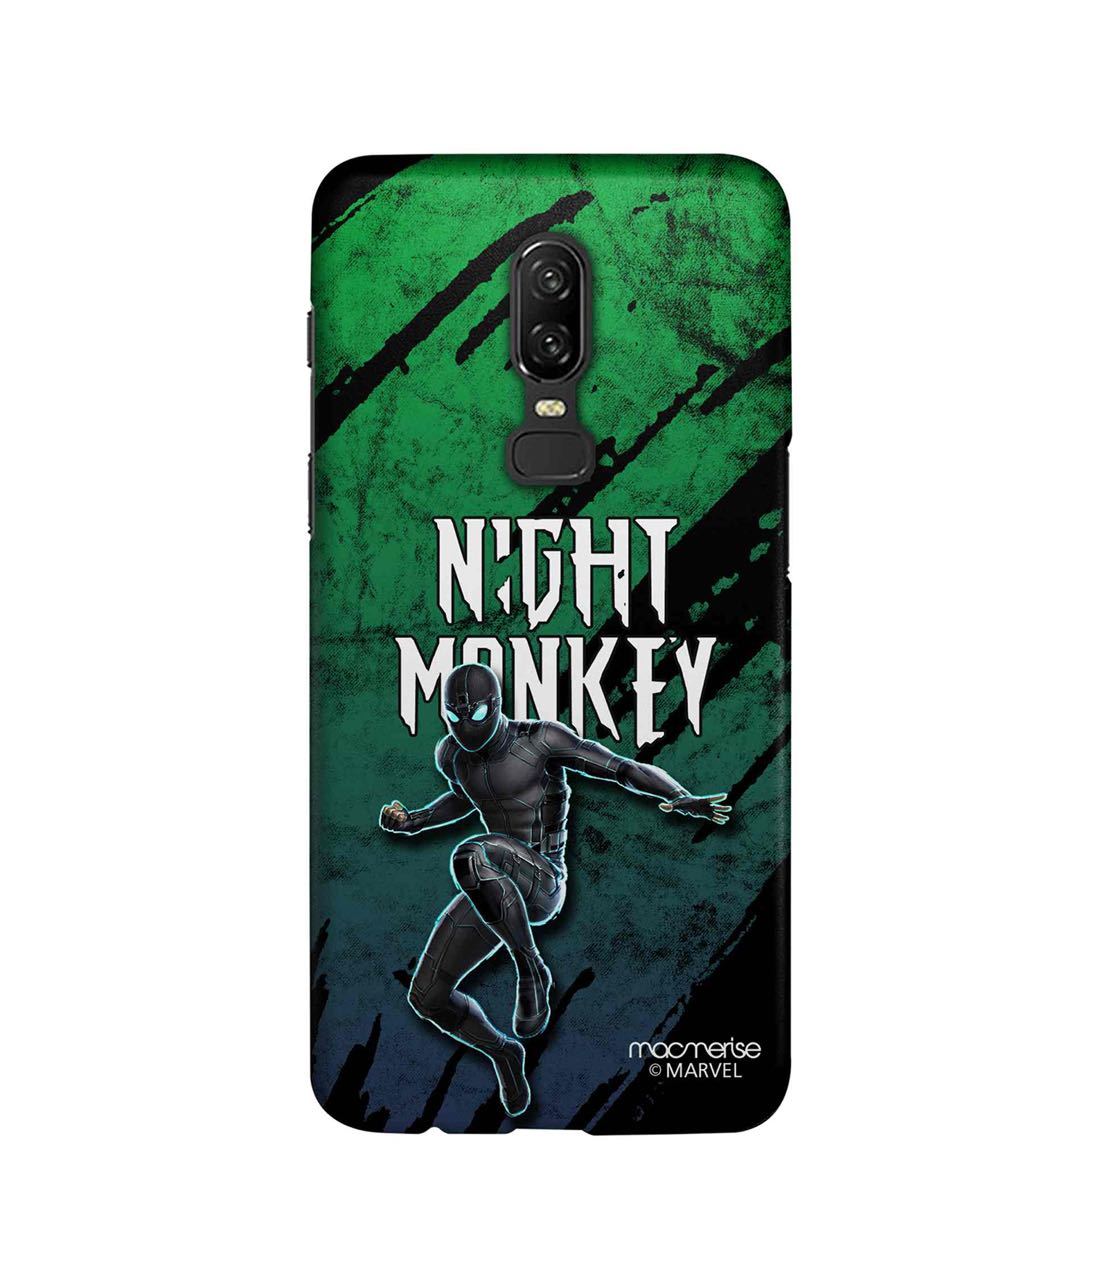 Buy Night Monkey - Sublime Case for OnePlus 6 Phone Cases & Covers Online